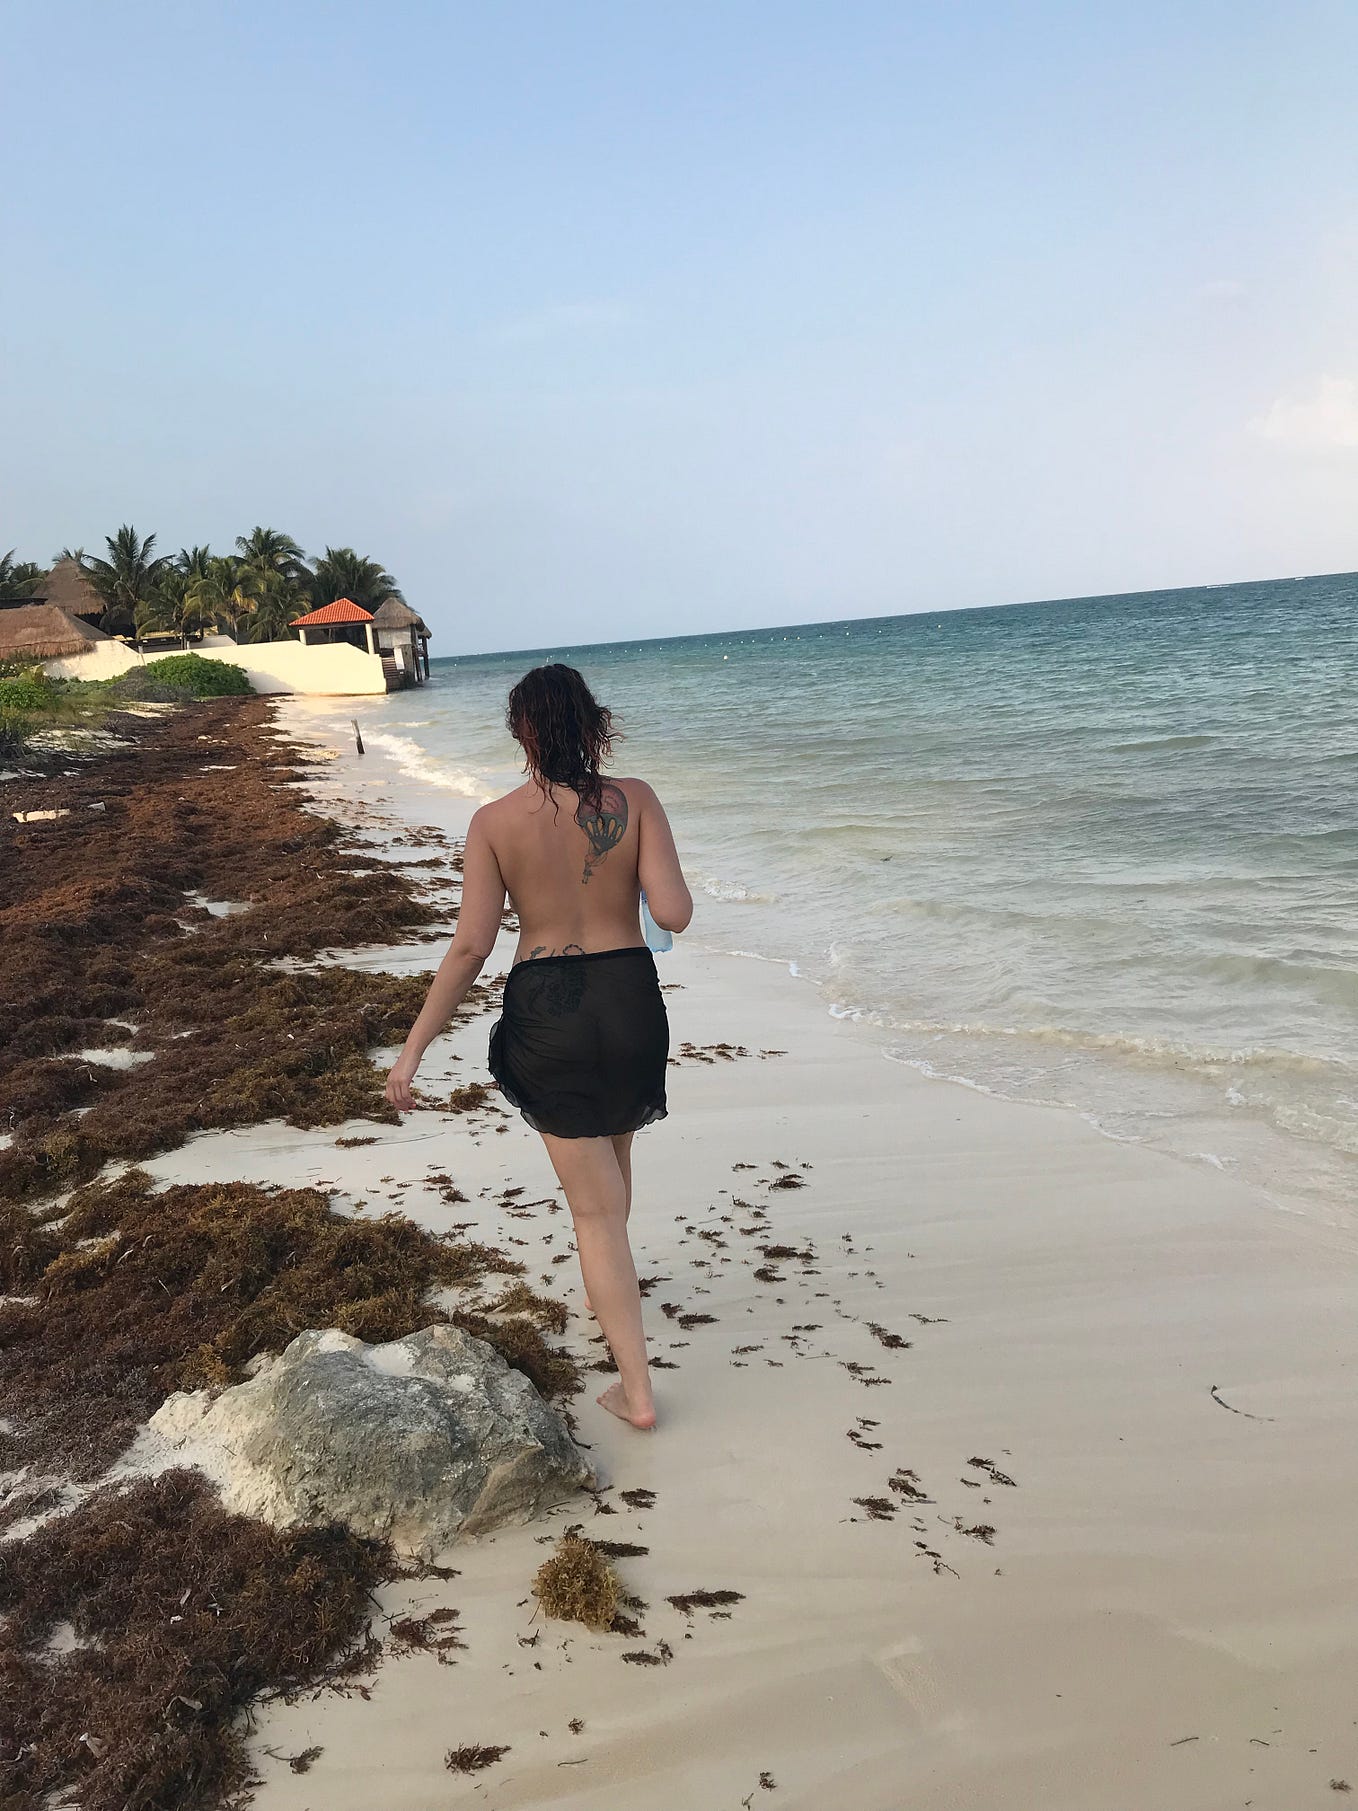 Our First Desire Riviera Maya Trip (April 2019) | Day 4 & 5